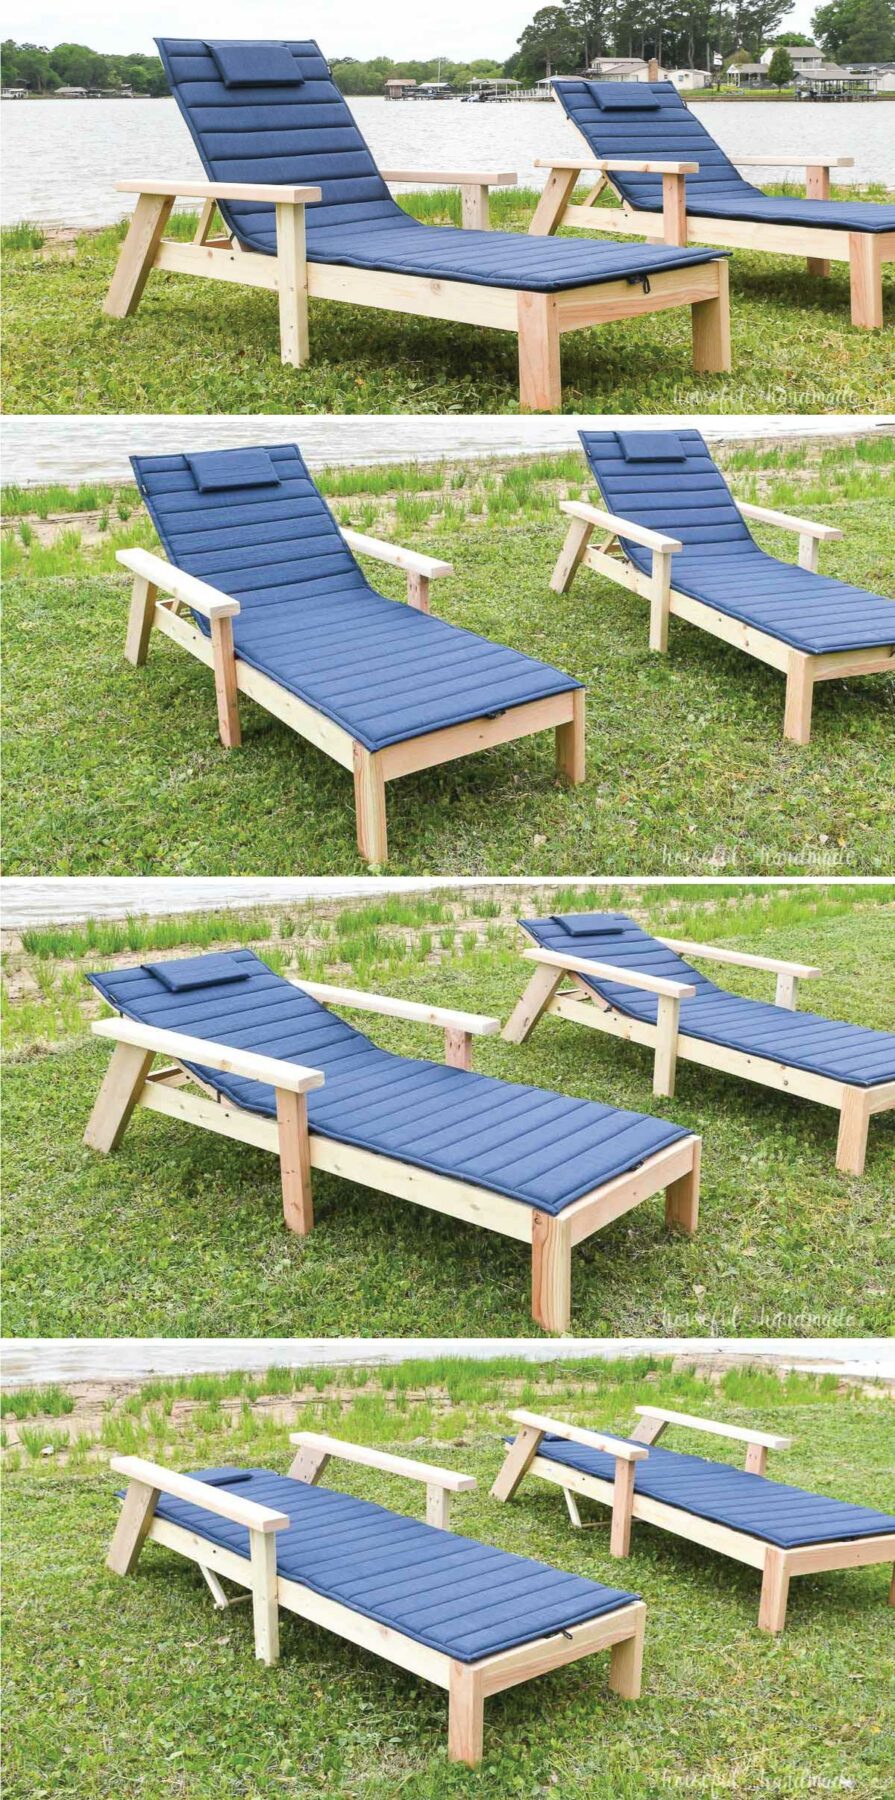 Four pictures showing the 3 different angles the chaise lounge chair can adjust to and the fully flat option. 